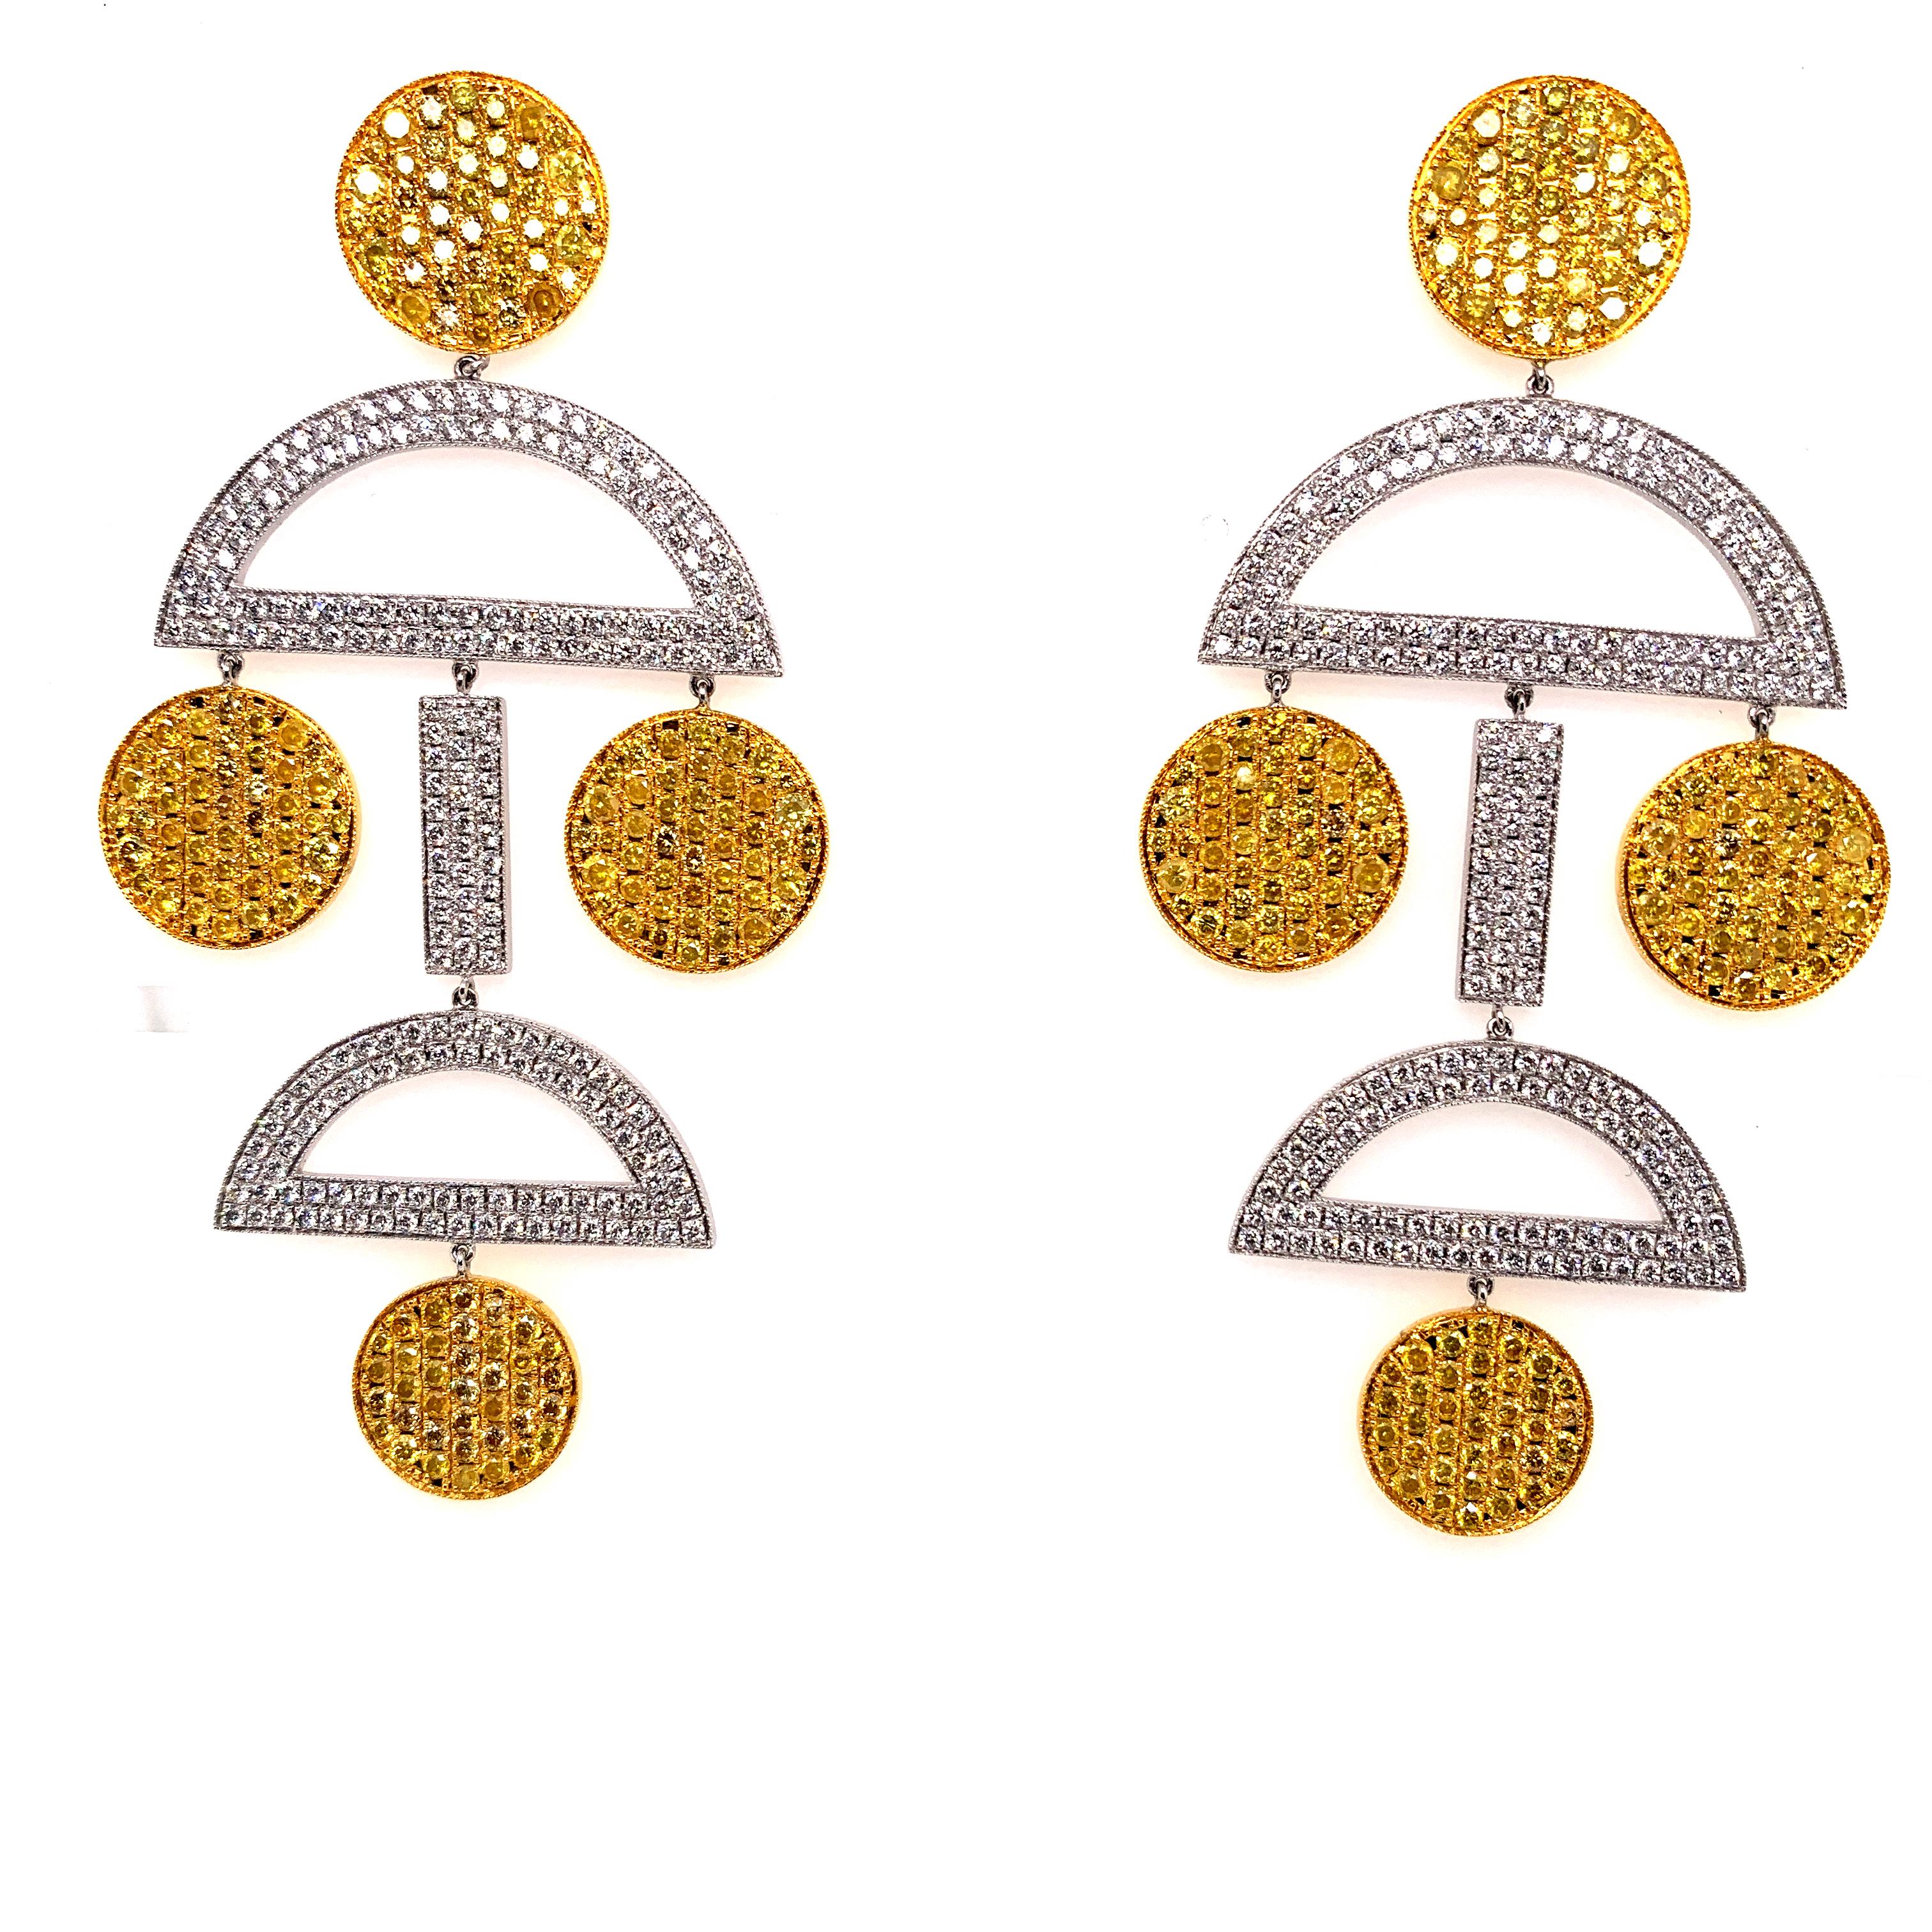 Sophia D, 10.30 Carat White and Yellow Diamond Platinum and Yellow Gold earrings For Sale 1